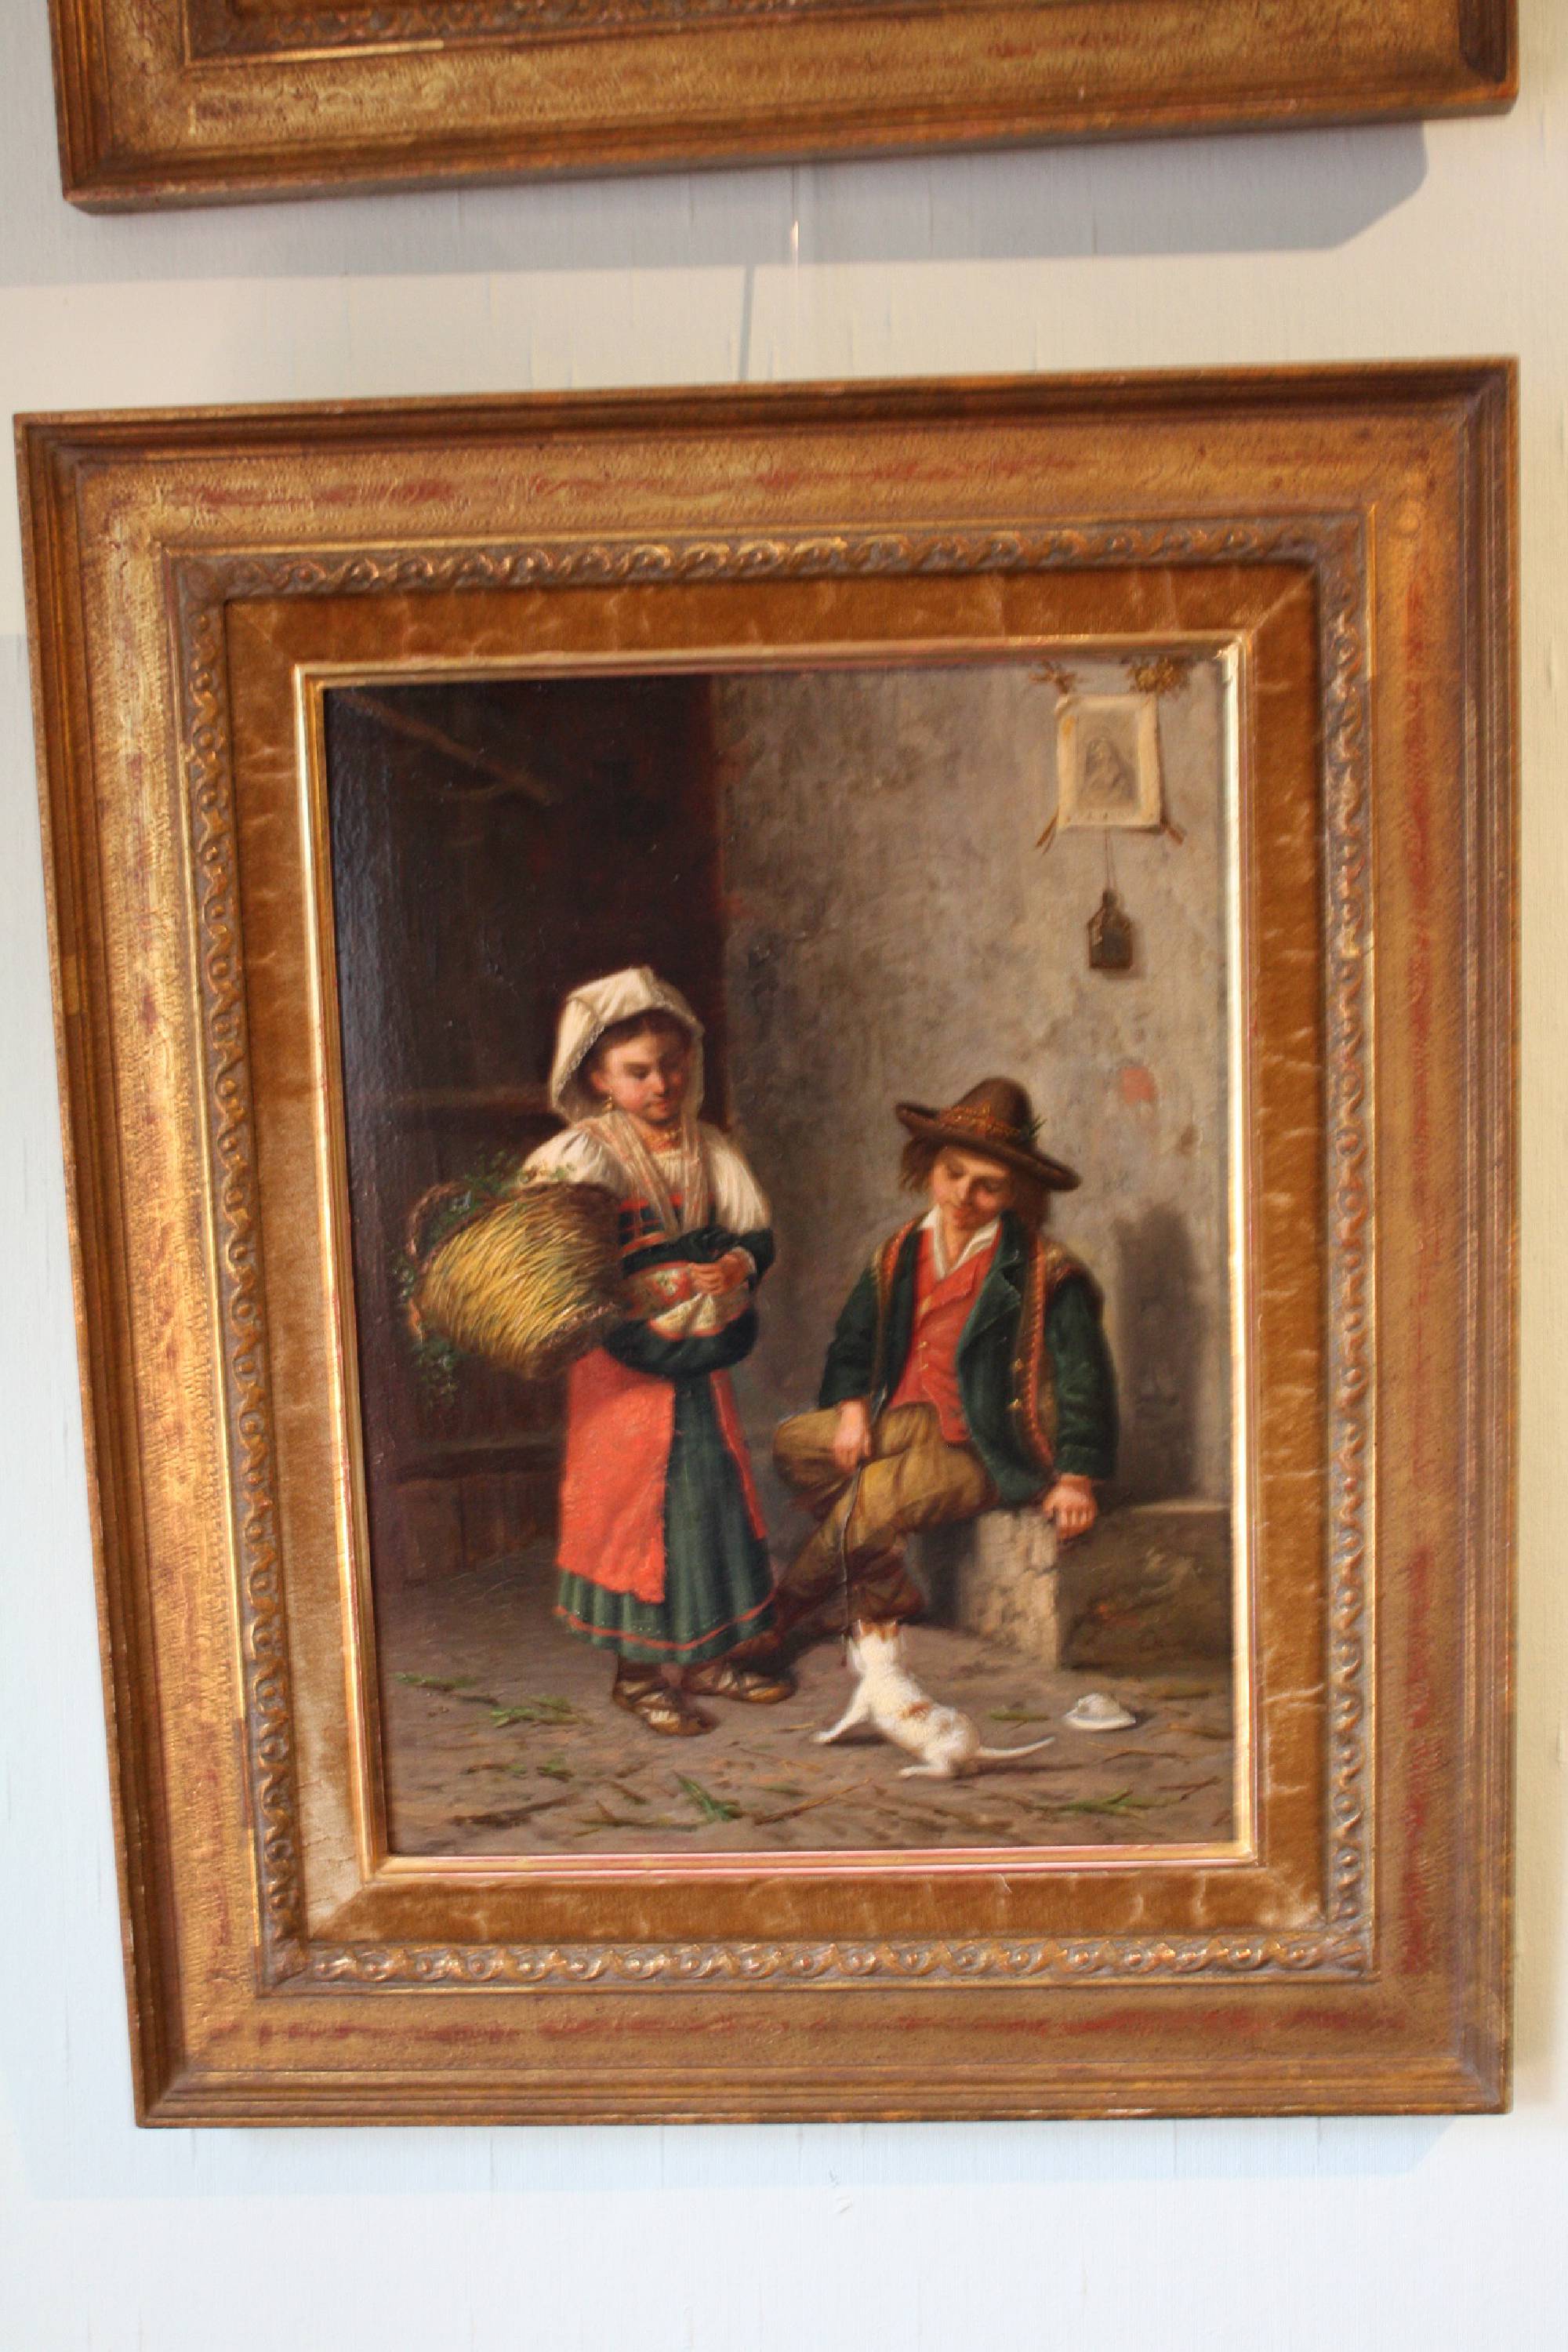 Fine Italian Mid-19th century scenery of children playing with a cat, painting oil on wood, signed 'G. Mormile',  Gaetano Mormile